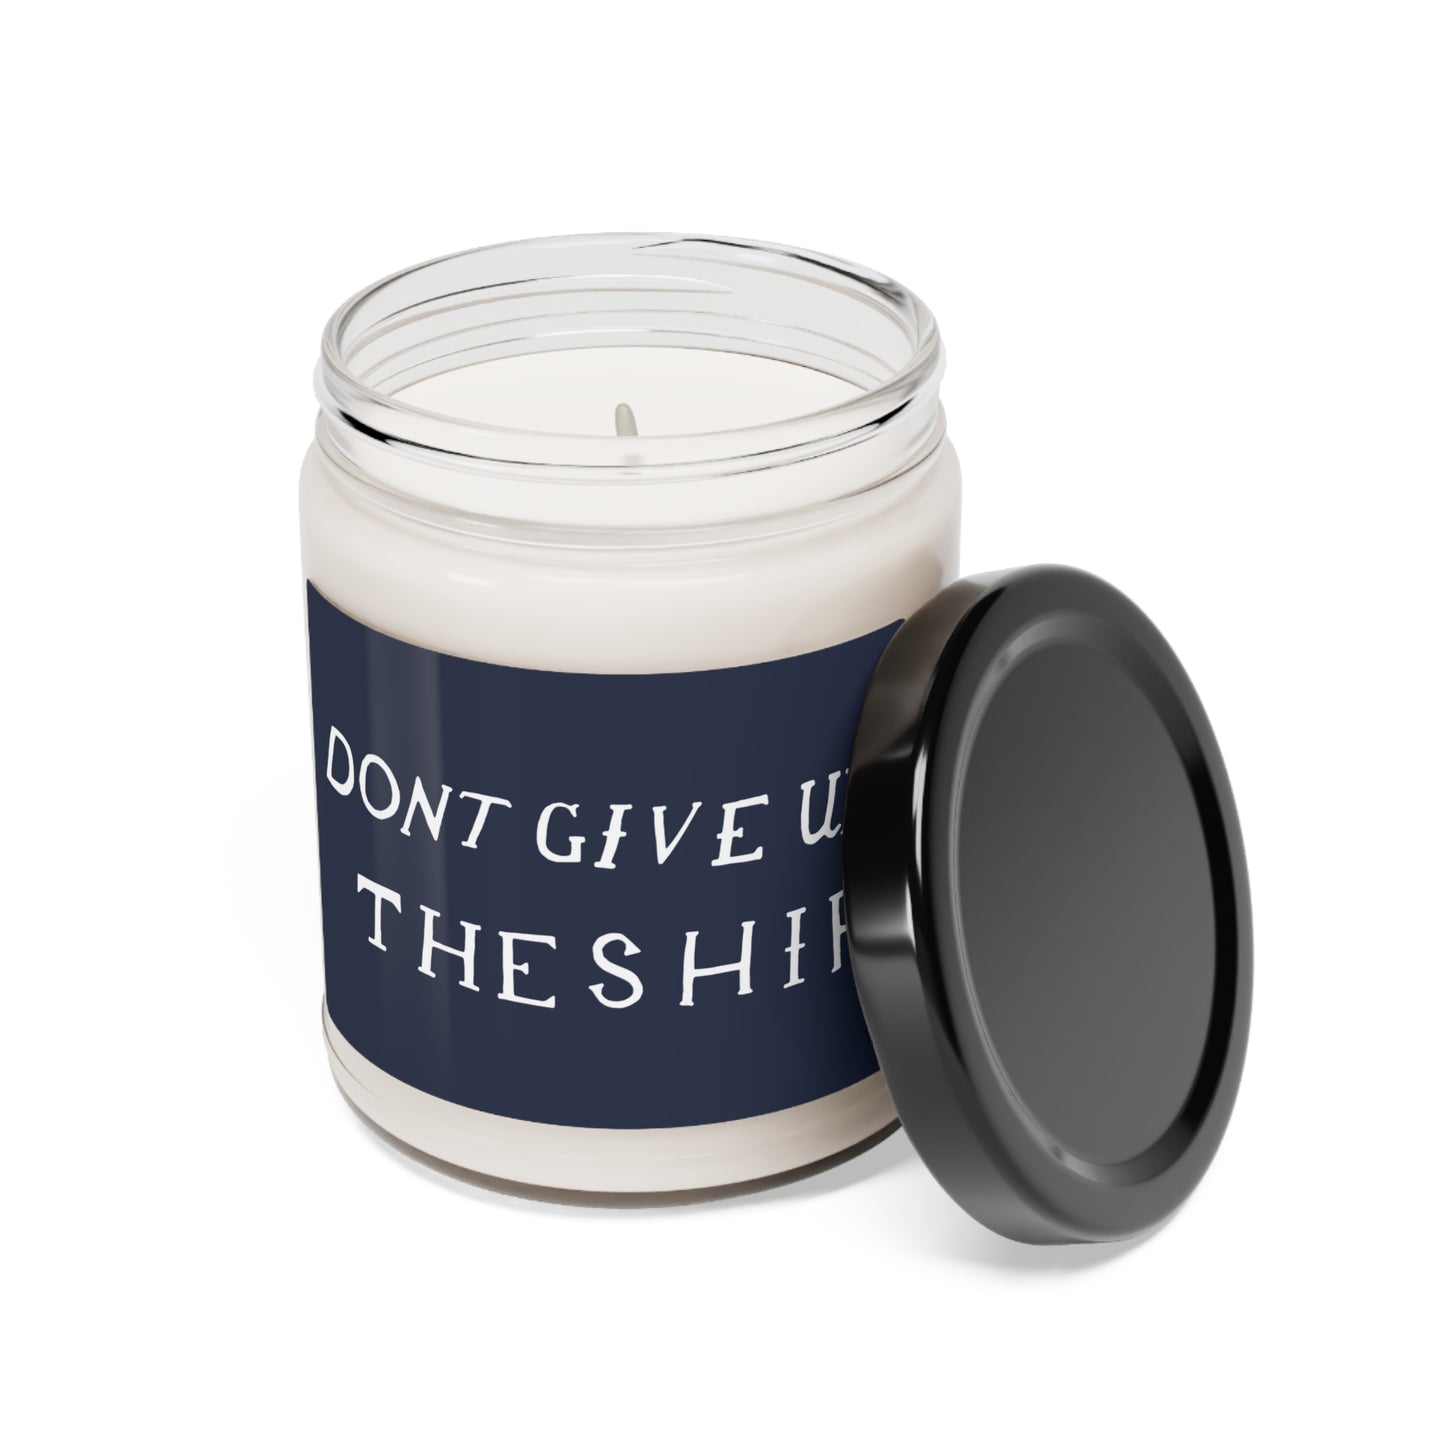 Don't Give Up The Ship Candle